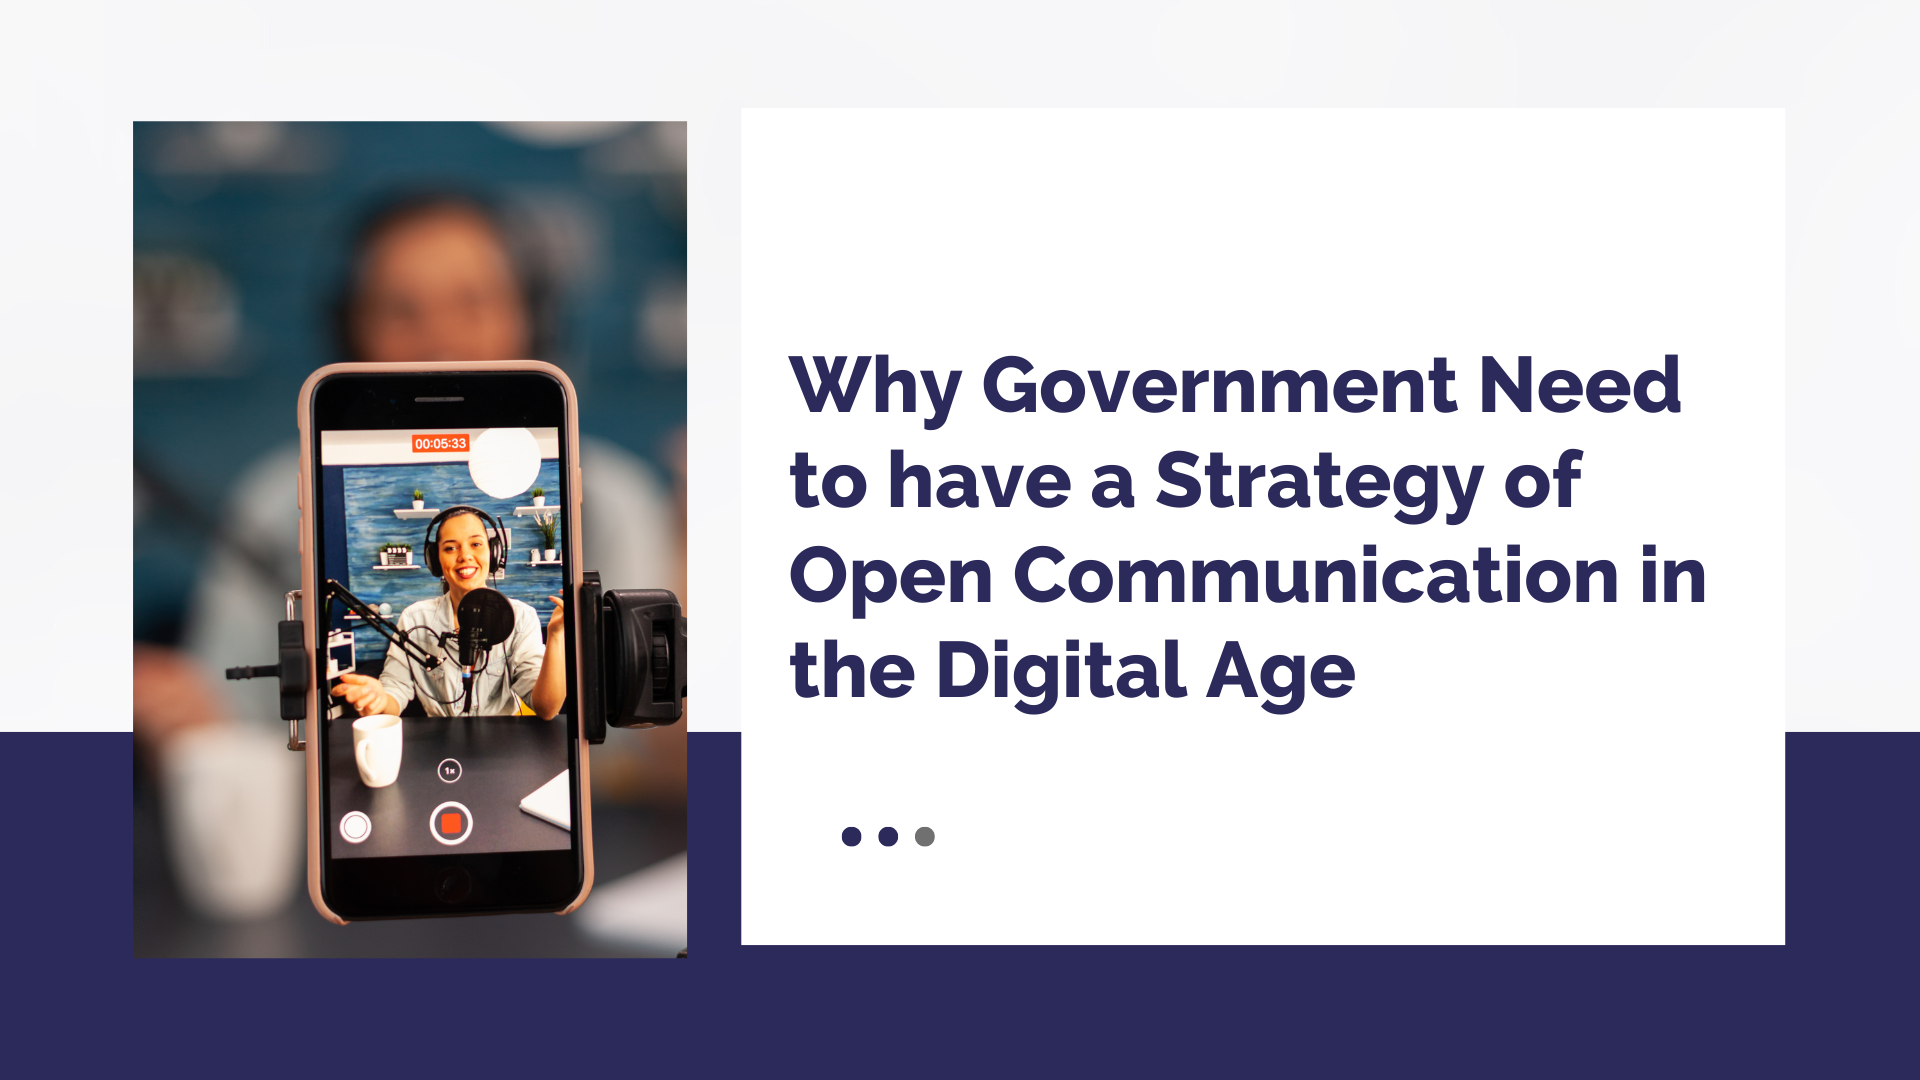 Why Government Need to Have a Strategy of Open Communication in the Digital Age